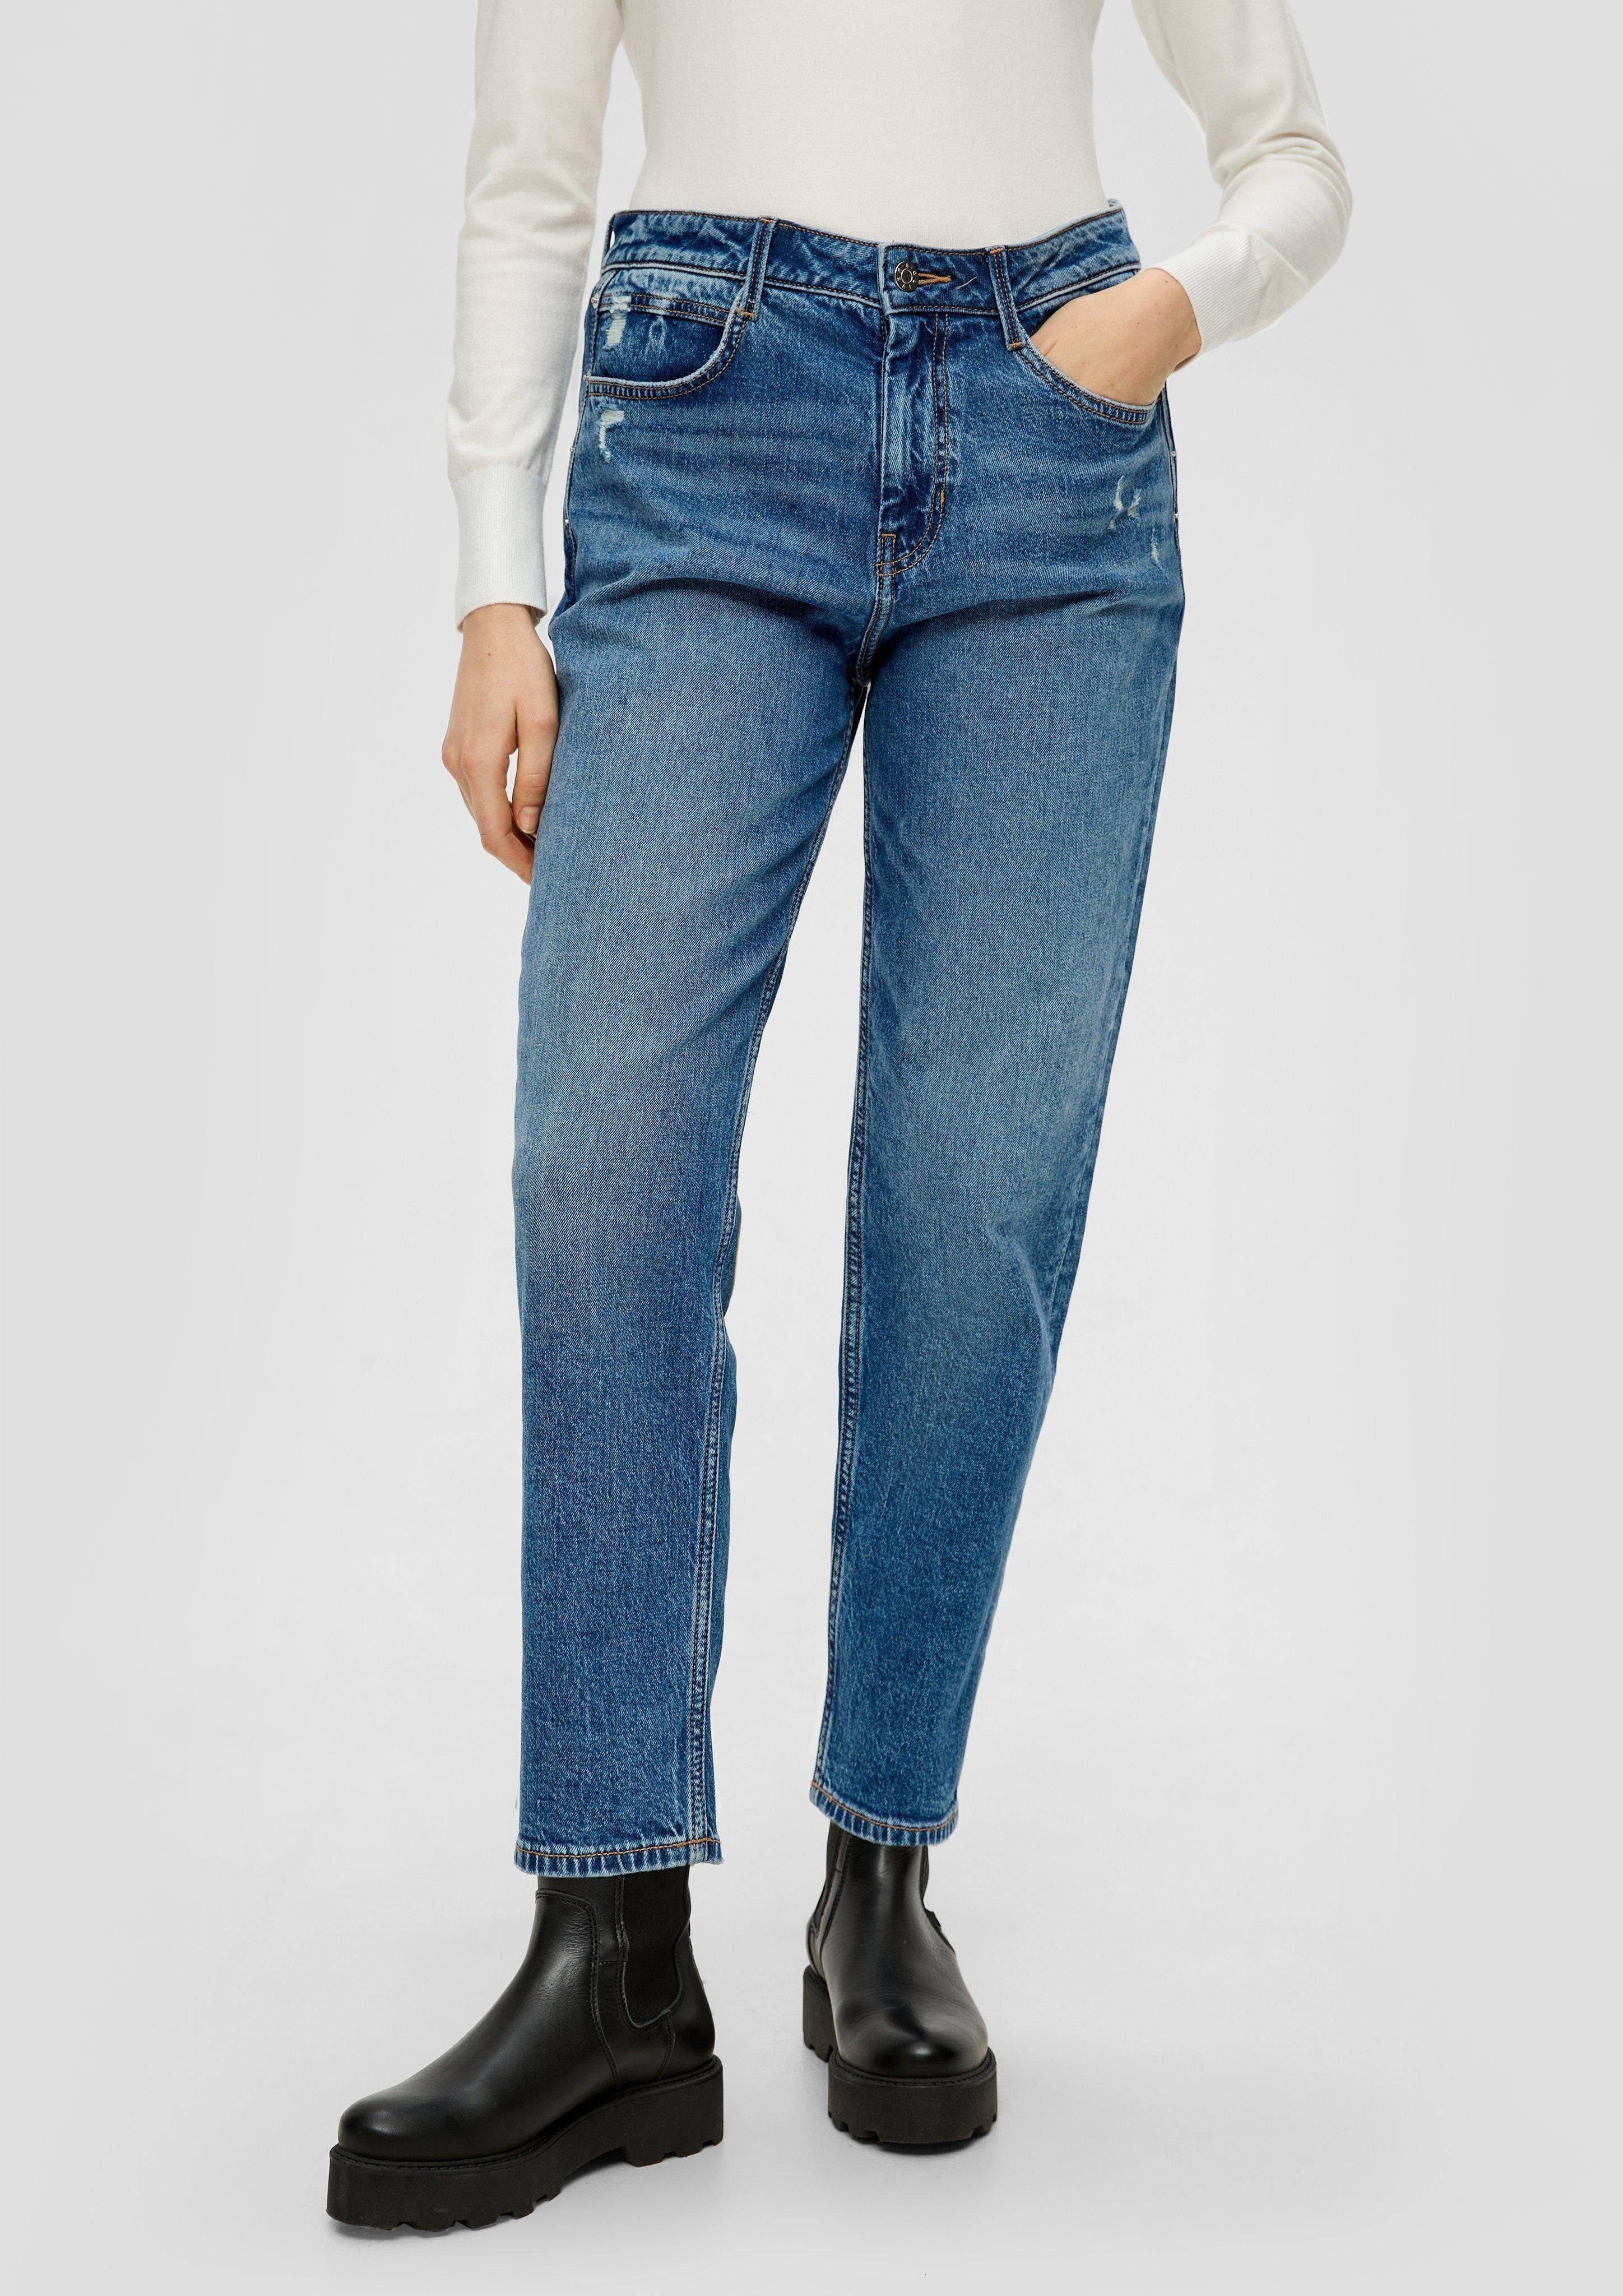 Nieten Tapered / / Leg / s.Oliver Regular Ankle-Jeans Label-Patch, 7/8-Jeans High Fit Rise Waschung, blau